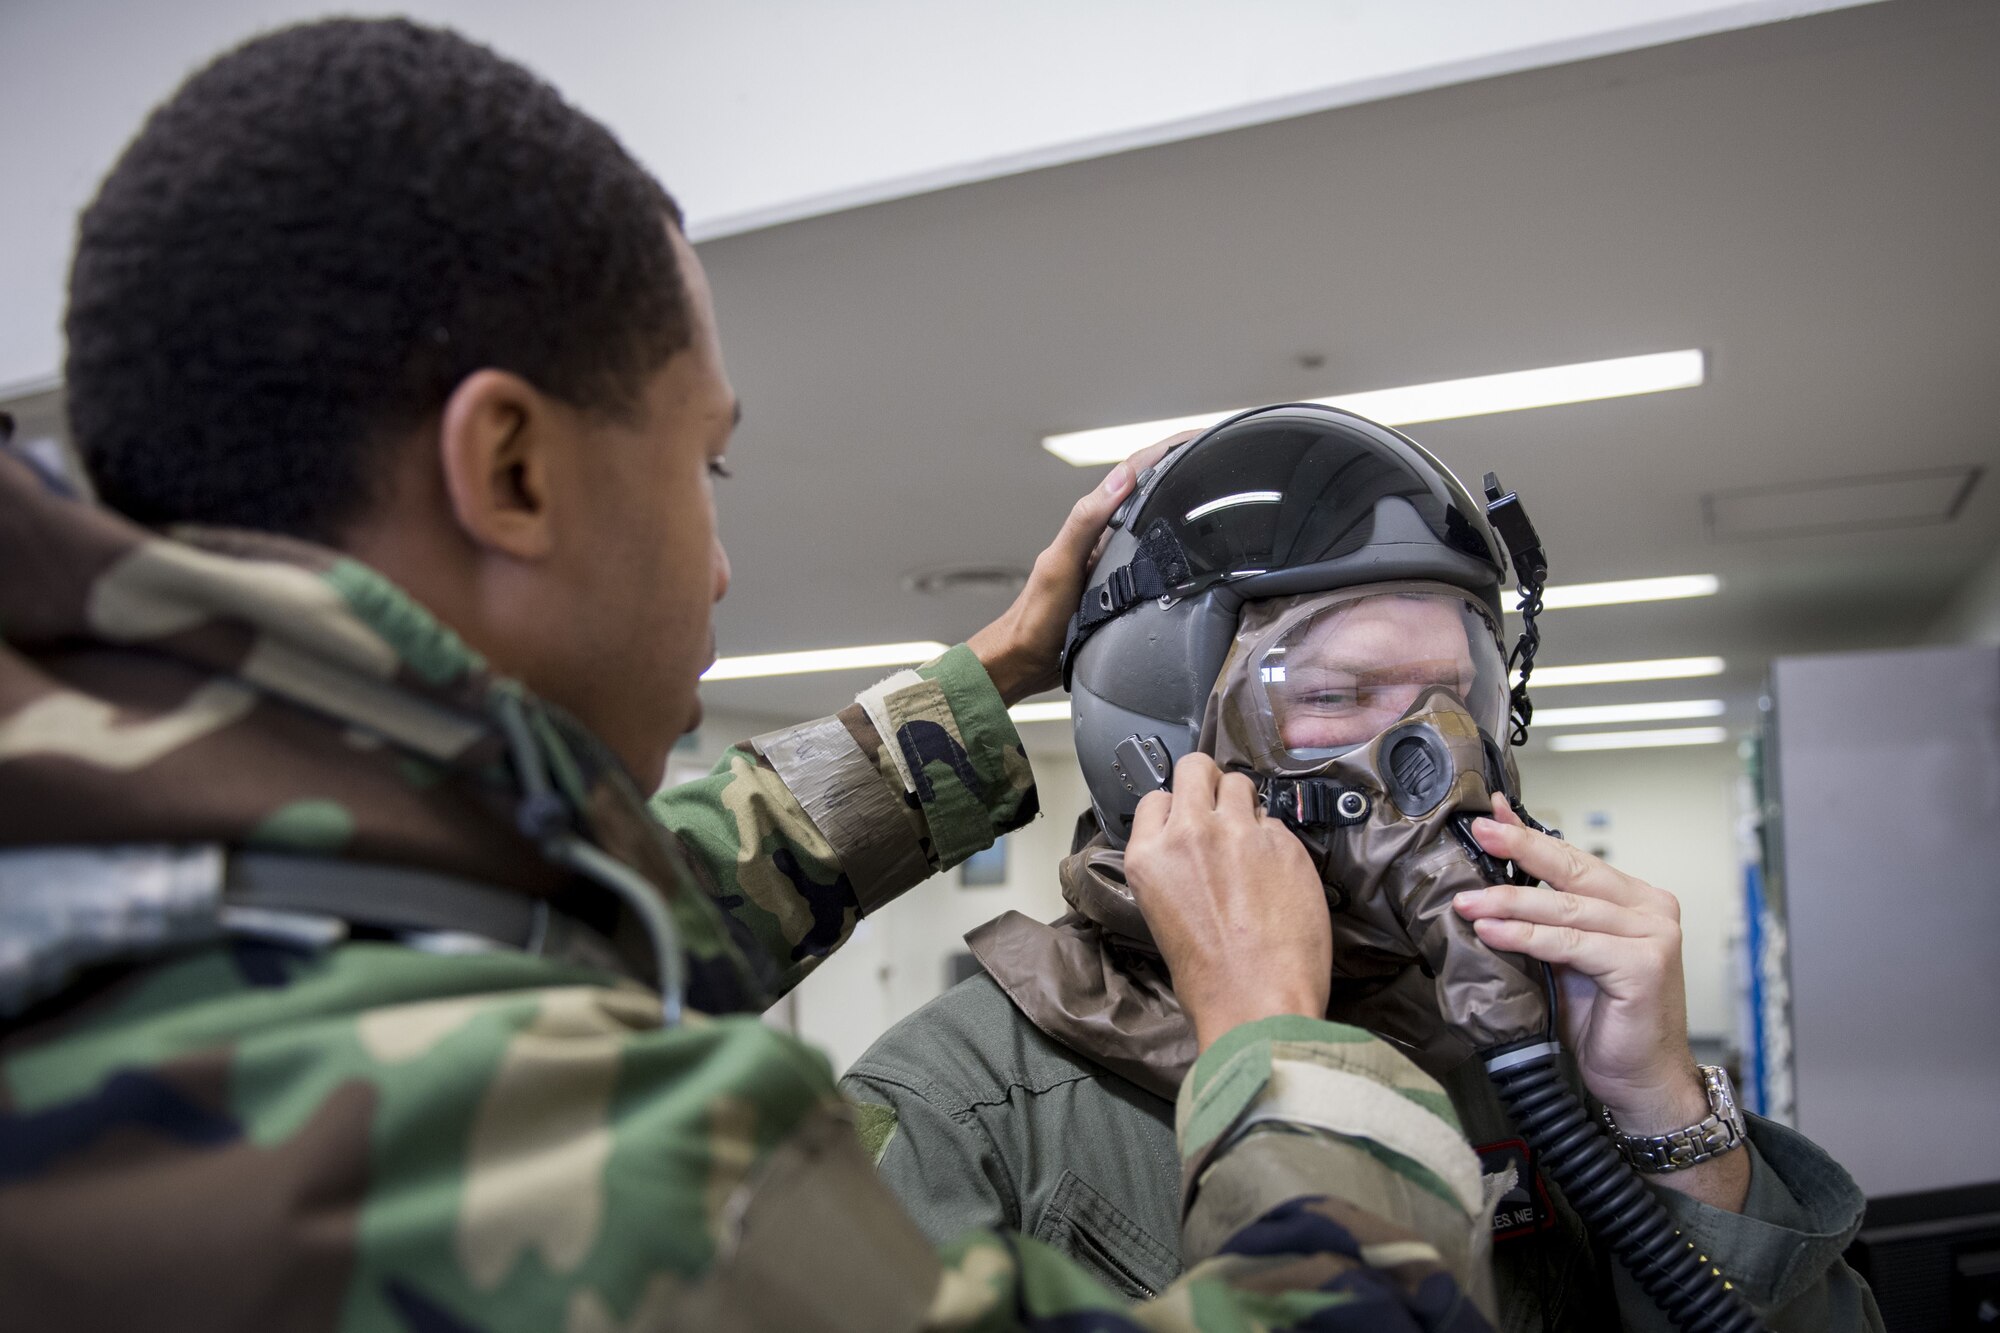 Staff Sgt. Terrance Macklin, 374th Operations Support Squadron aircrew flight equipment craftsman, performs an inspection on aircrew chemical, biological, radiological and nuclear protective gear during exercise Vigilant Ace 18, Dec. 6, 2017, at Yokota Air Base, Japan.